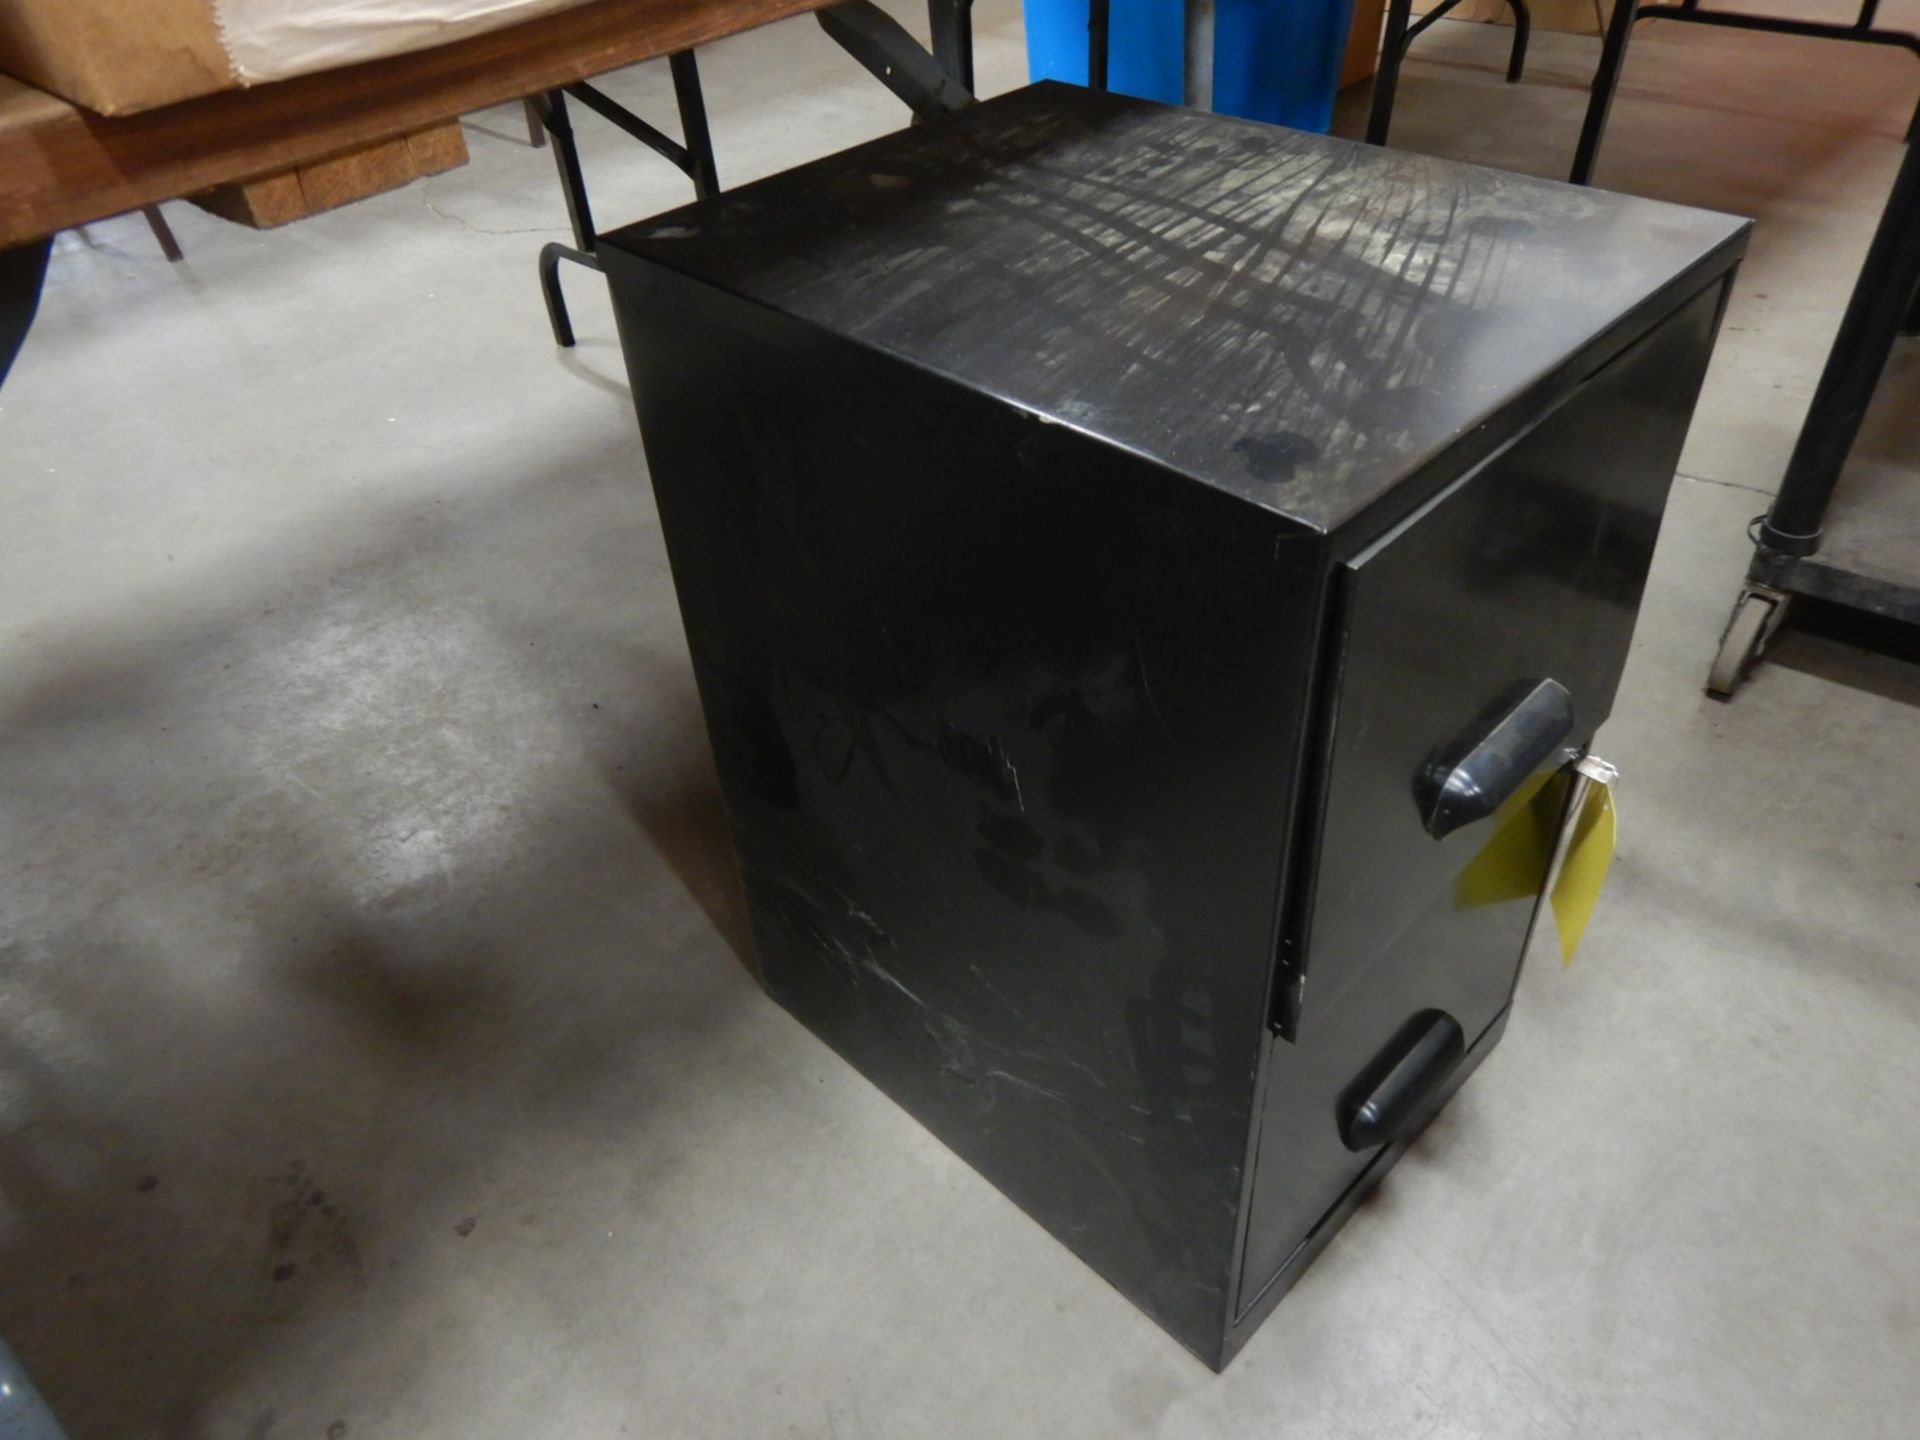 2 DRAWER METAL FILING CABINET 14X18X24 TALL - Image 2 of 3